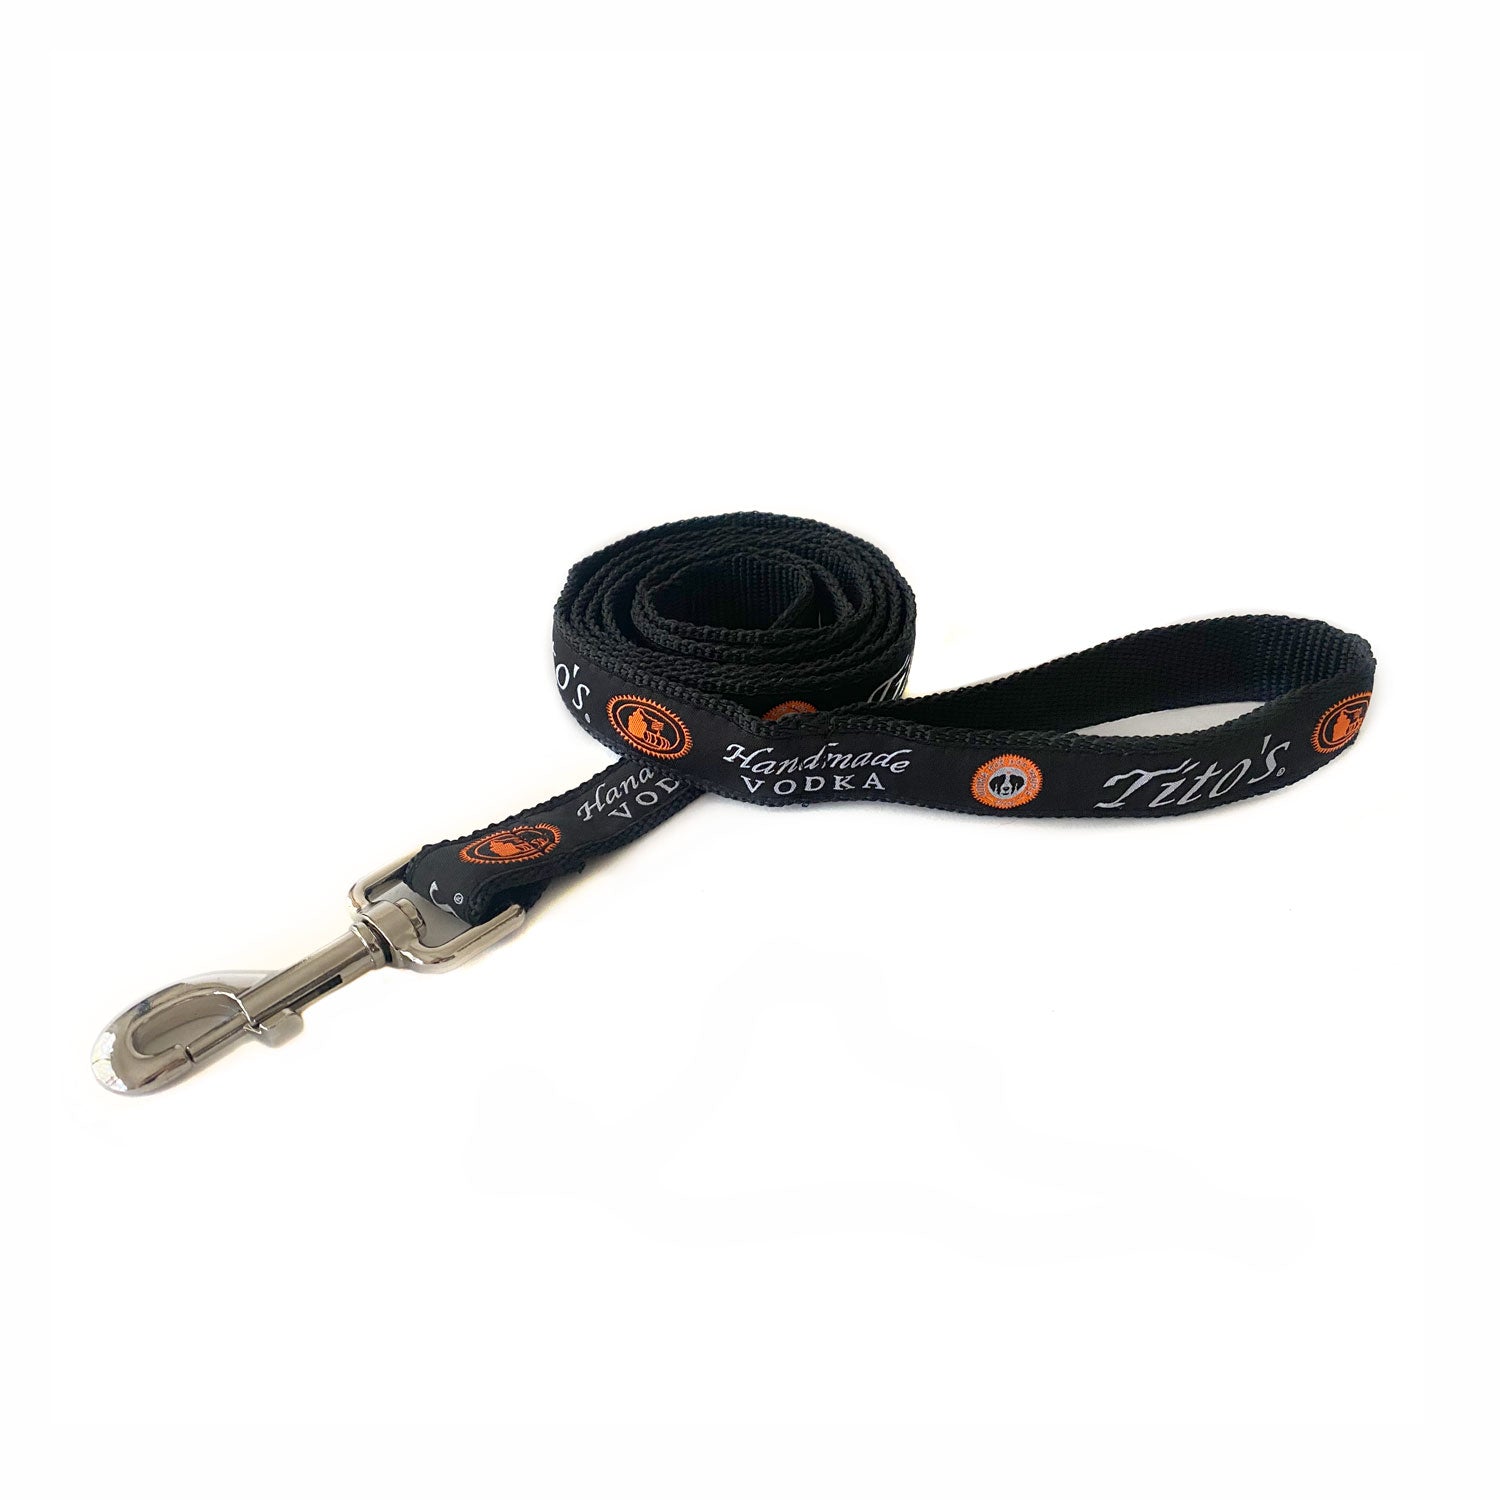 Dog leash with Tito's logo and Vodka For Dog People logo